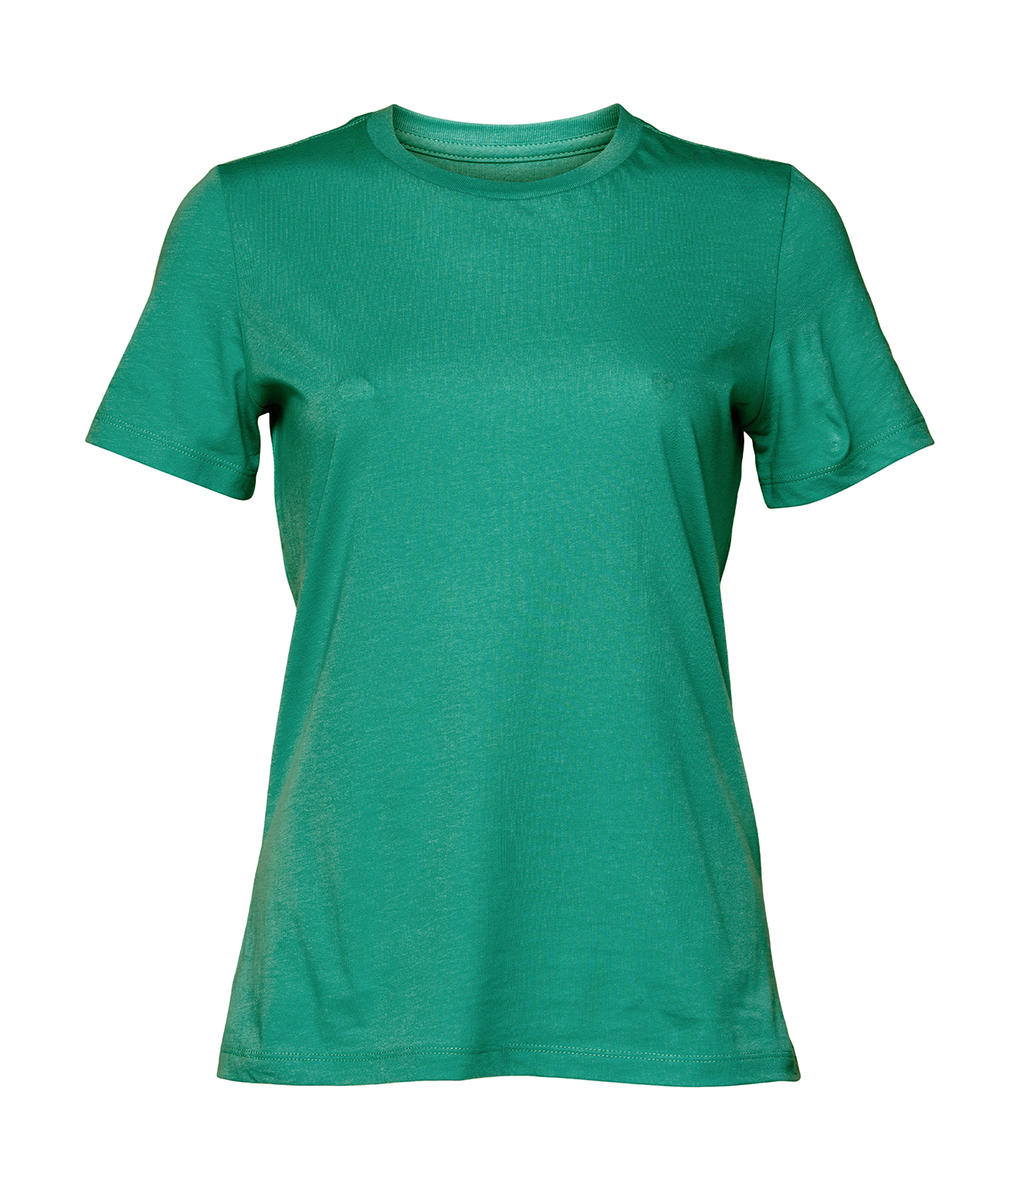  Womens Relaxed Jersey Short Sleeve Tee in Farbe Teal